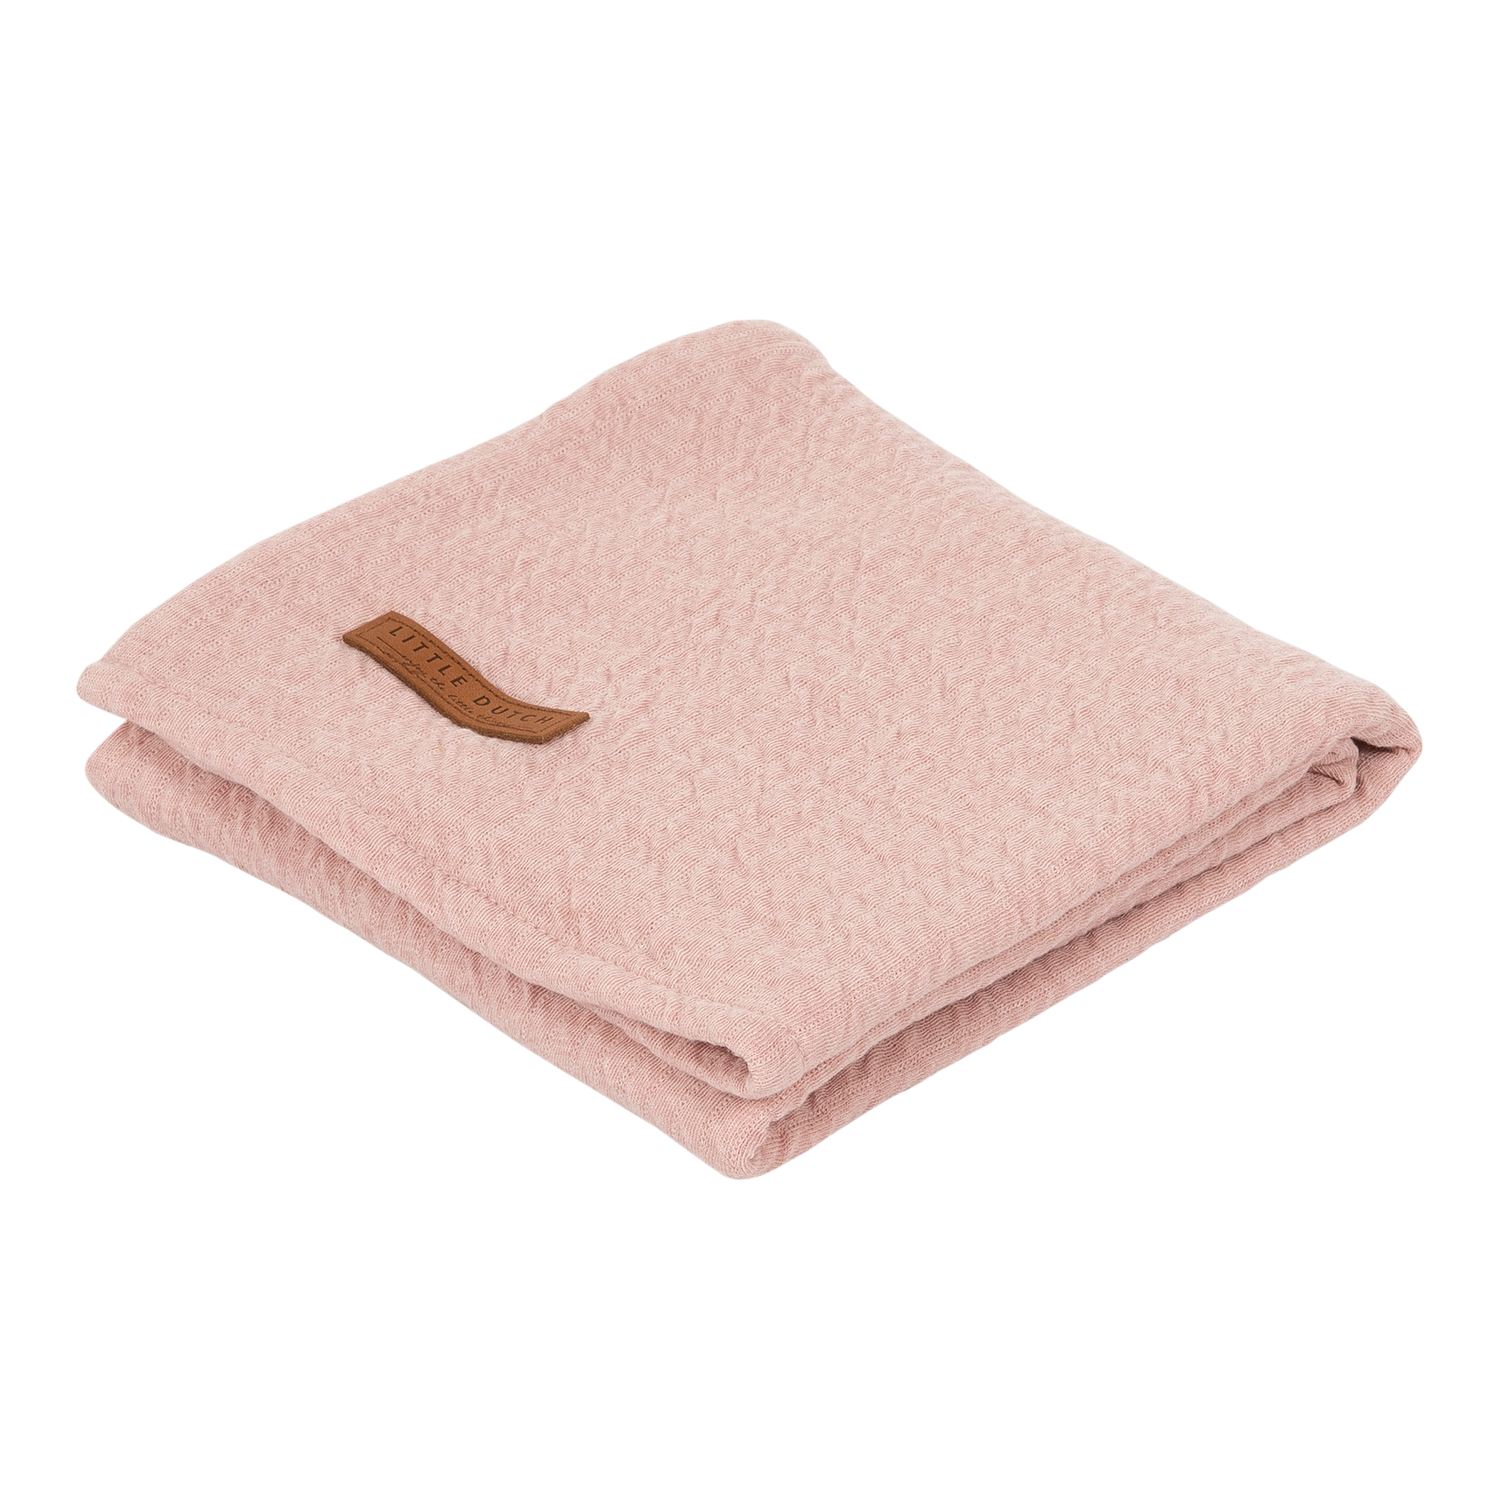 Musselin Swaddle Tuch / Pucktuch Pure rosa (120x120 cm)